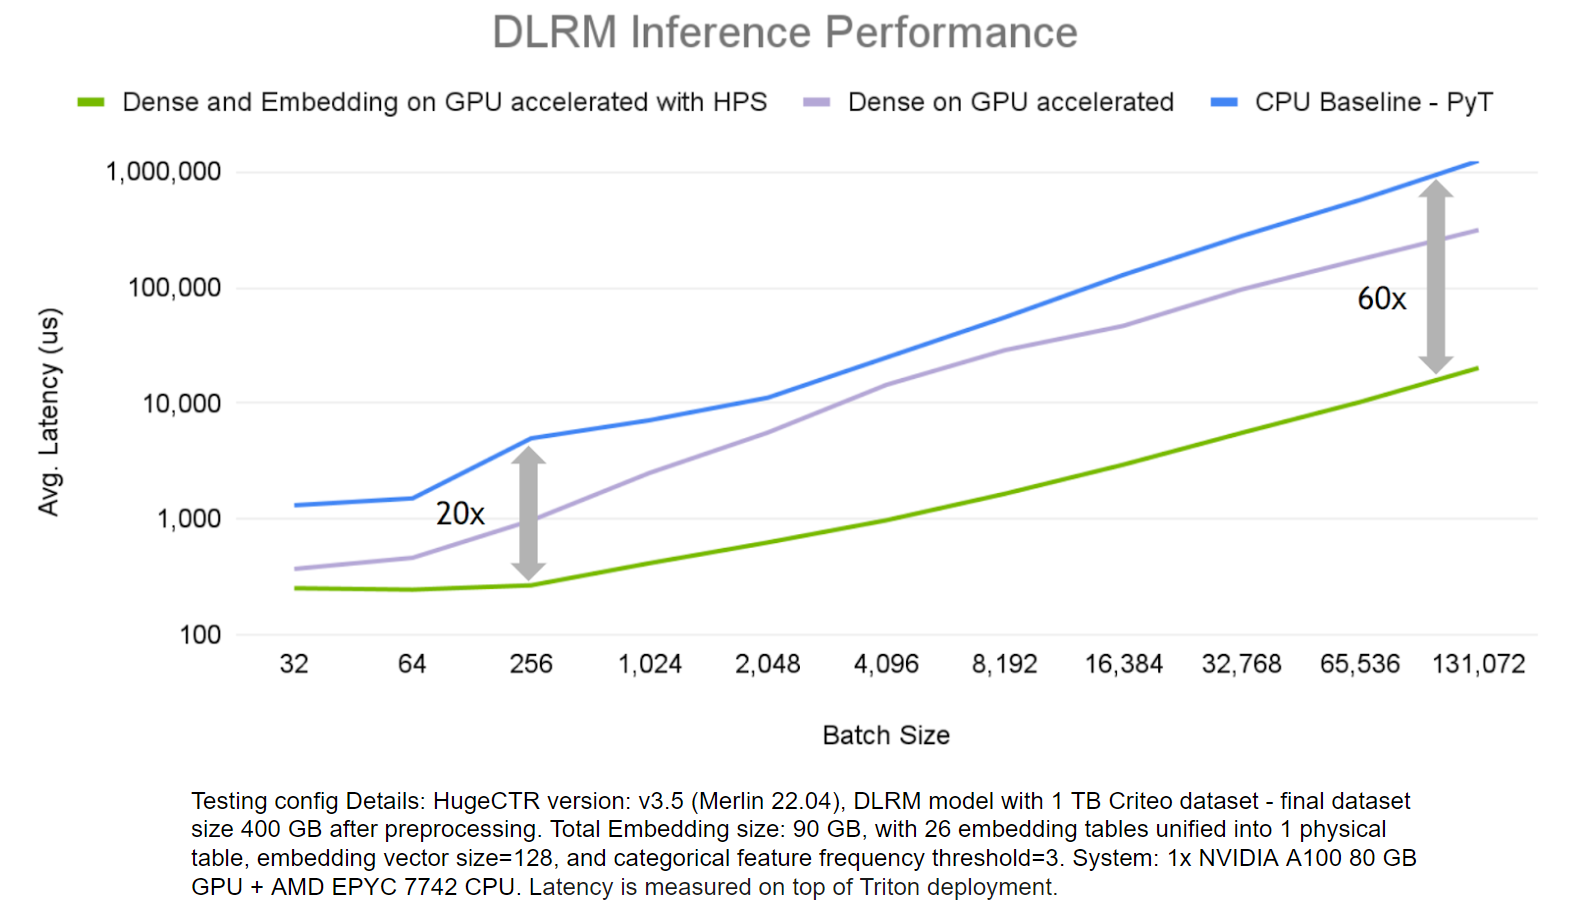 Graph showing a comparison of inference performance. Testing config Details: HugeCTR version: v3.5 (Merlin 22.04), DLRM model with 1 TB Criteo dataset - final dataset size 400 GB with FL=3. Embedding size: 90 GB, unify 26 embedding tables into 1 physical table, embedding vector size=128. System: 1xA100 80 GB + EPYC 7742. Latency is measured on top of Triton deployment.